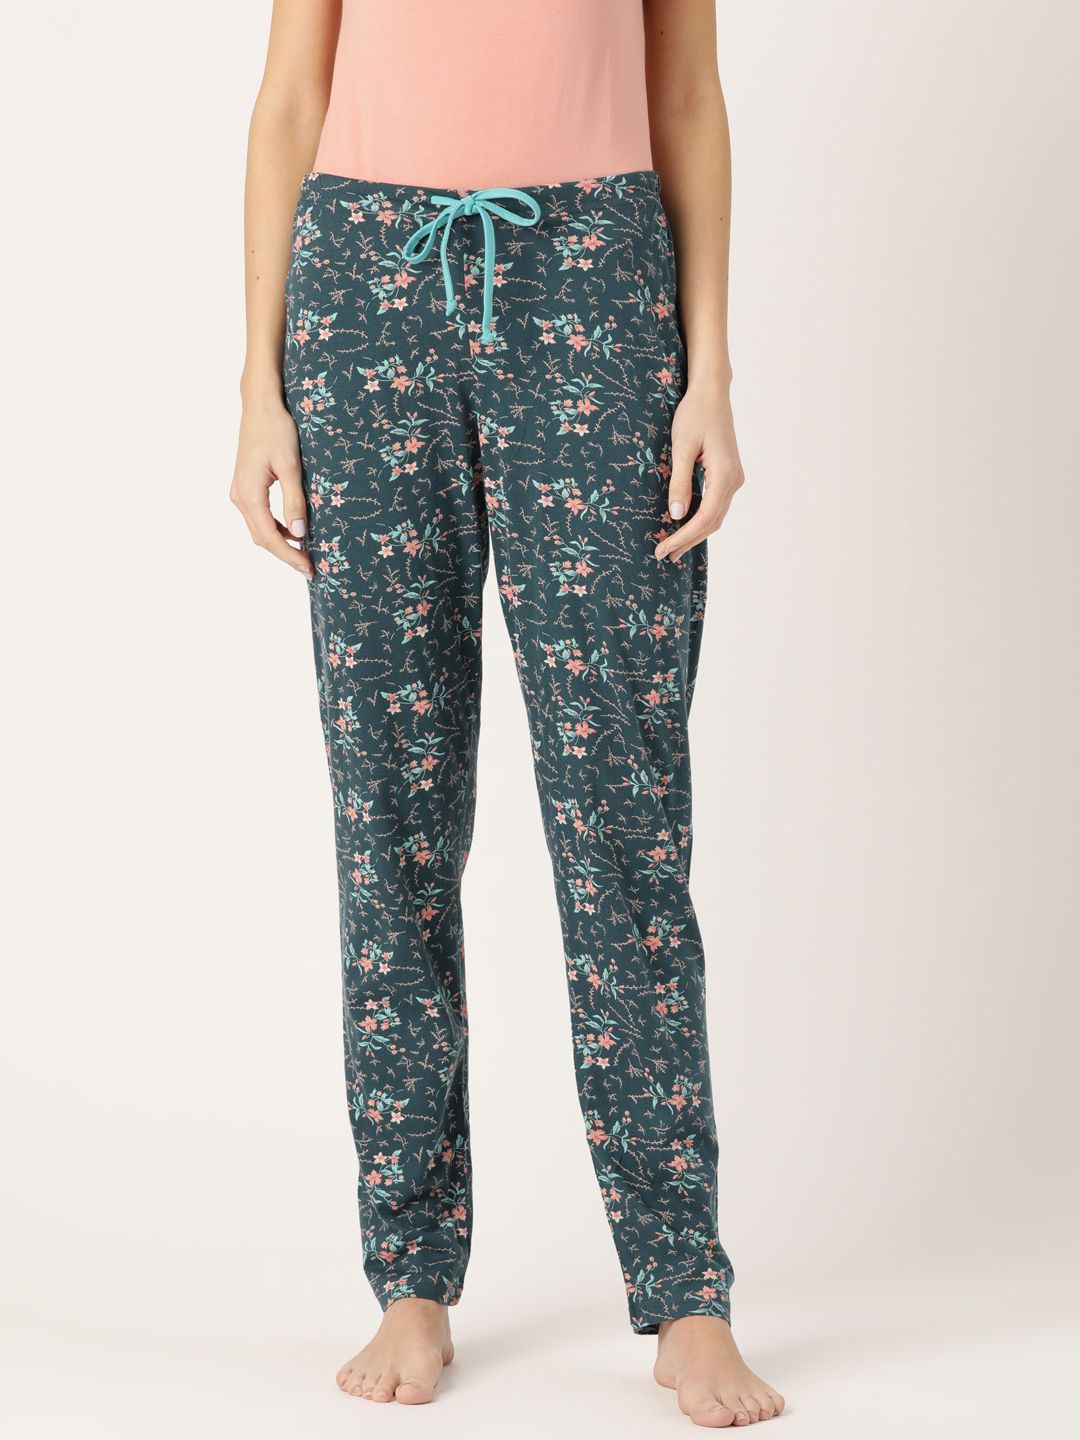 Kanvin Women Teal Blue & Peach-Coloured Floral Printed Lounge Pants Price in India